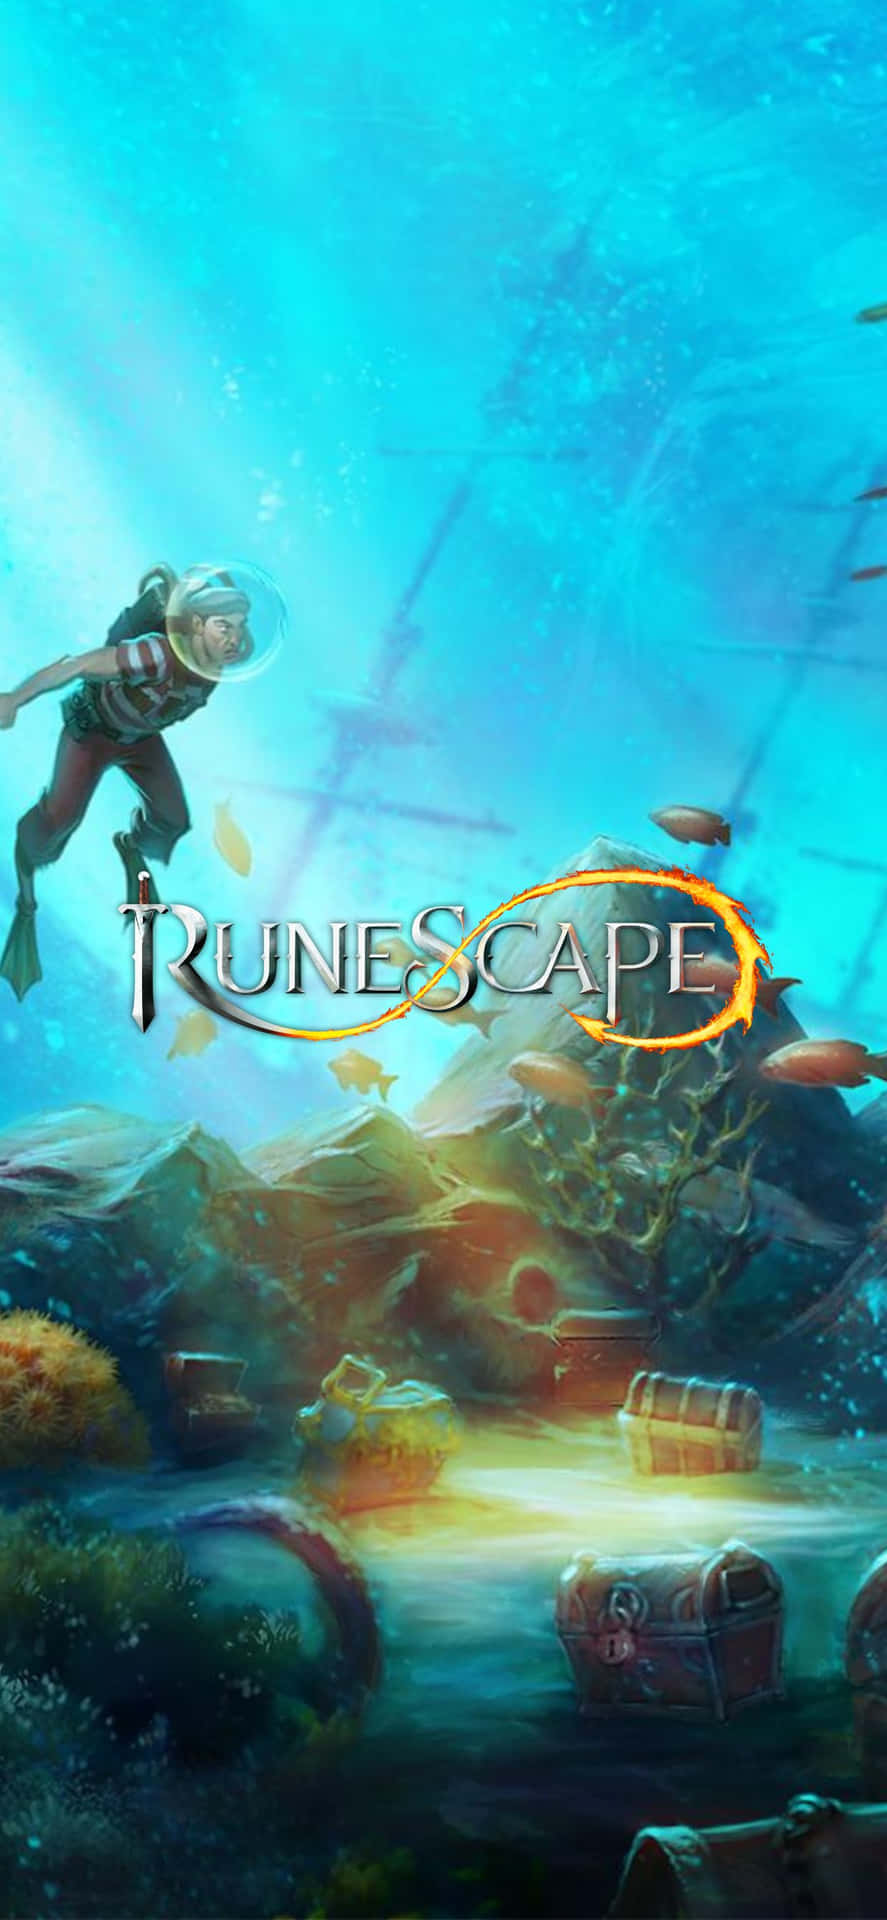 Enjoy the gaming experience on your new Iphone Xs Max with Runescape